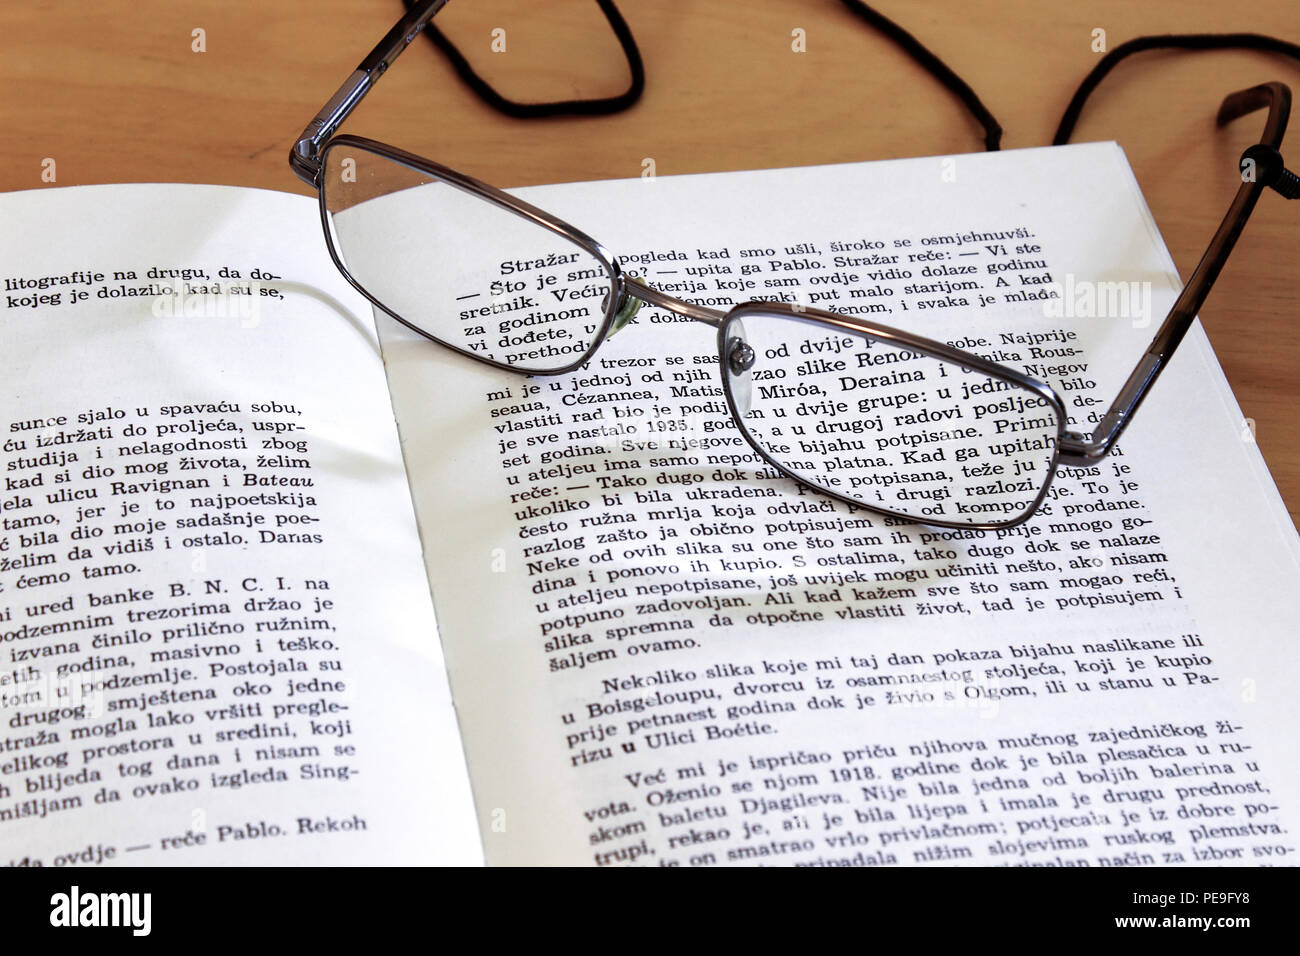 Reading glasses laying on an open book page Stock Photo - Alamy